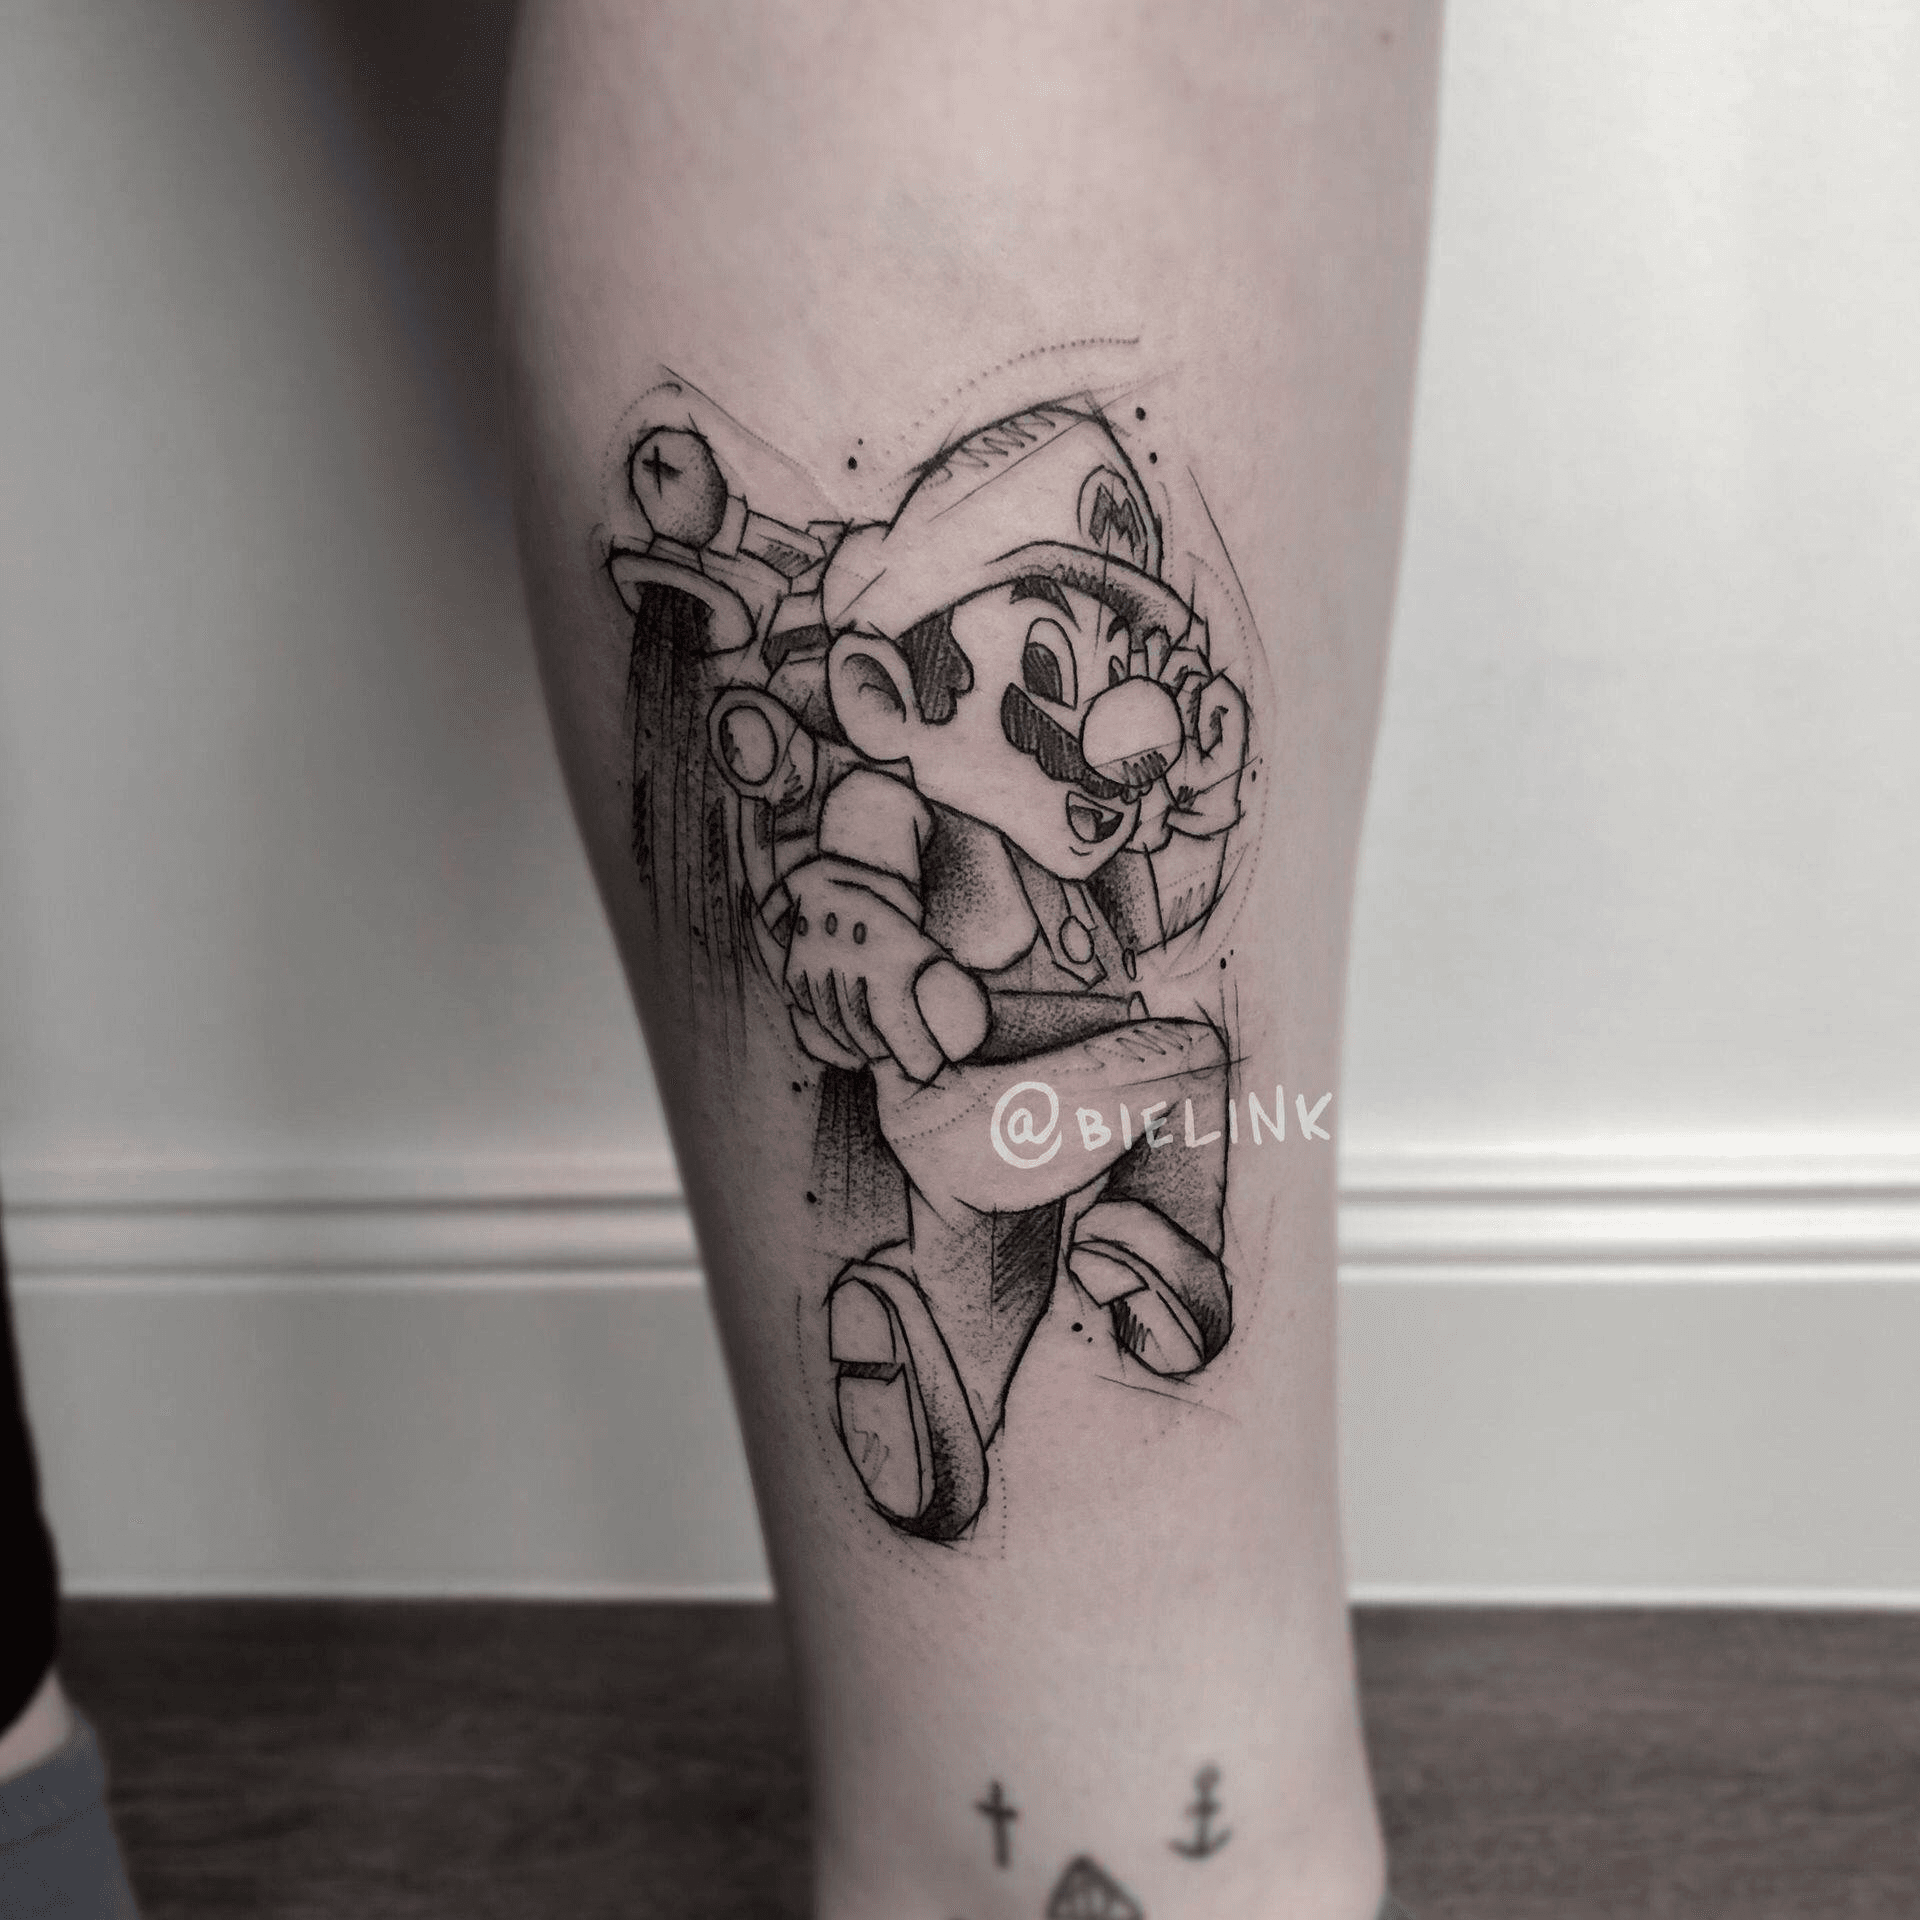 Super Mario Bros sleeve by Kat McCulloch at Workhorse Tattoo in Houston  TX  rtattoos